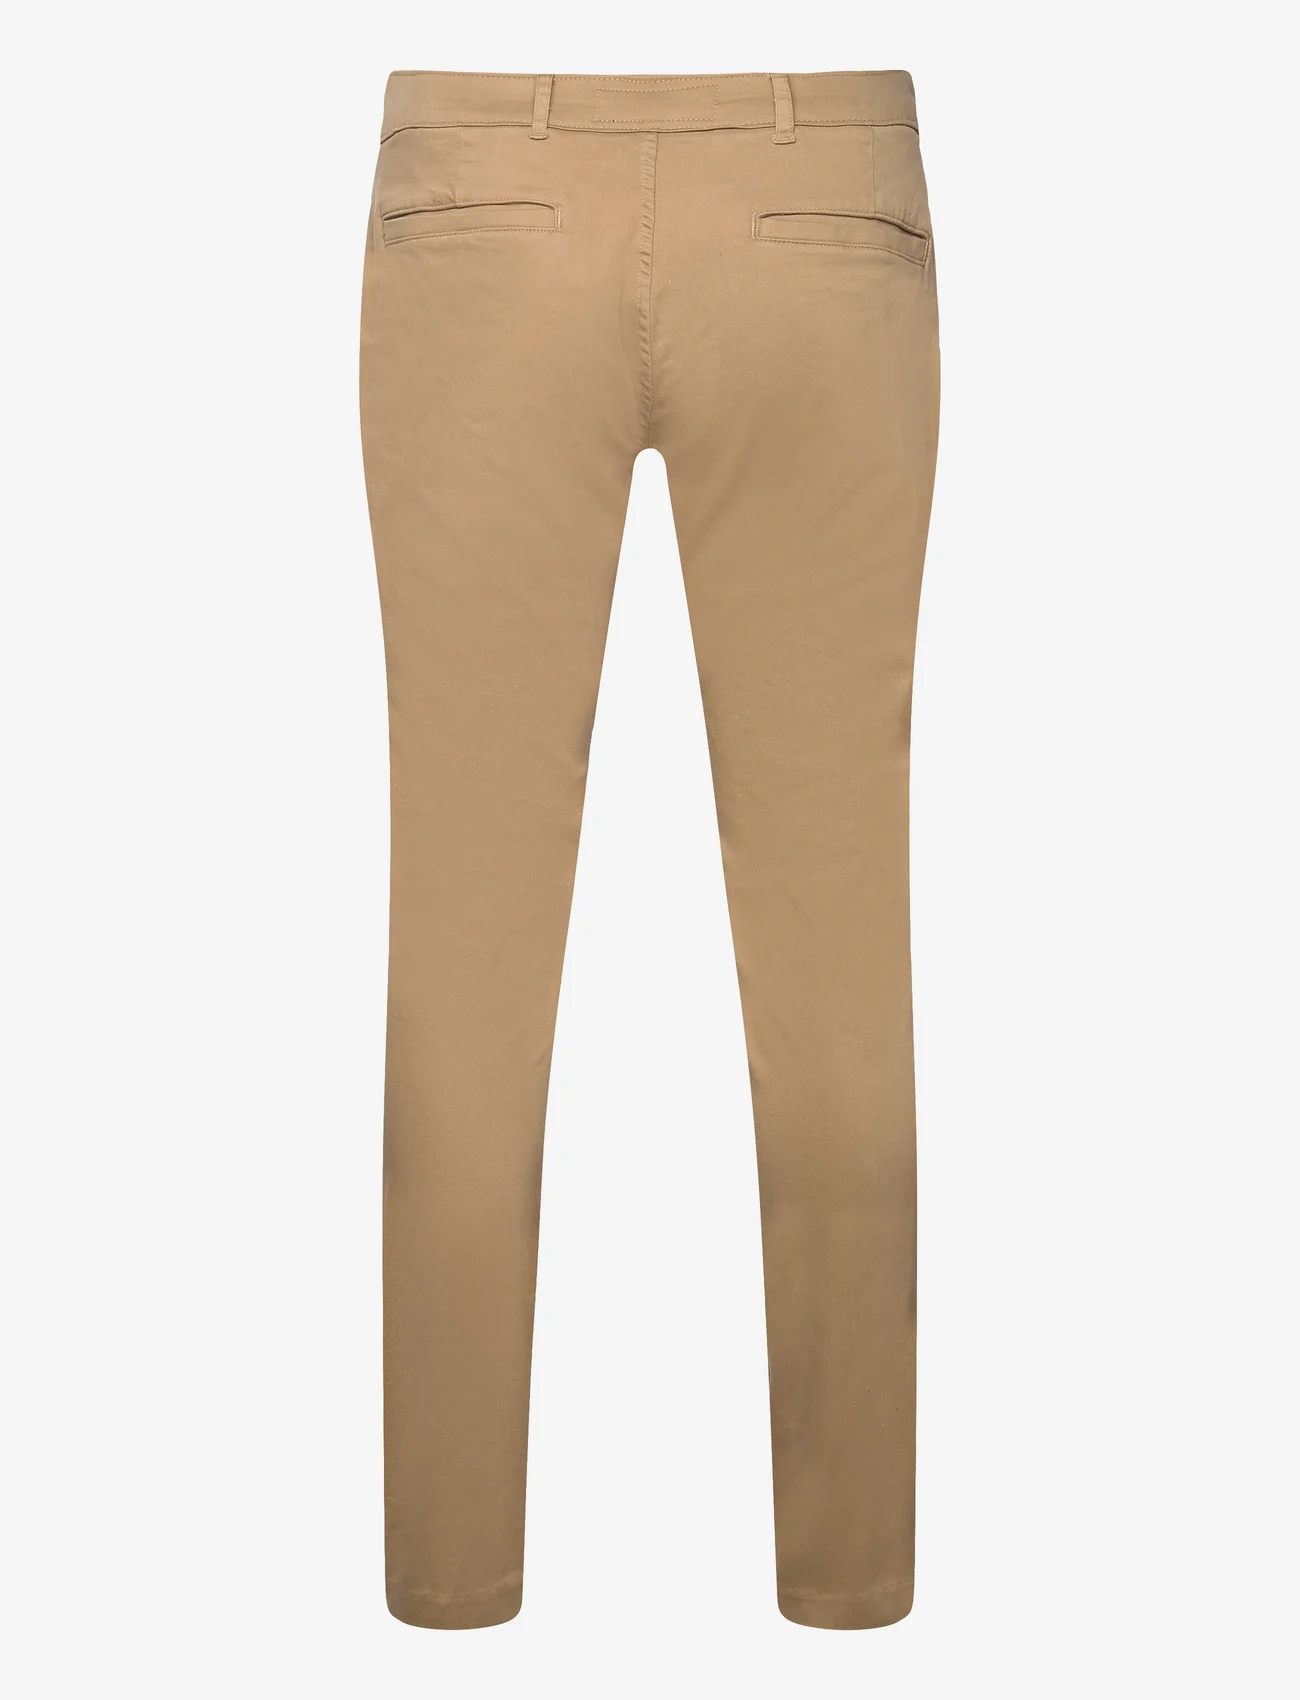 Abercrombie & Fitch - ANF MENS PANTS - chino's - kelp 475 - 1